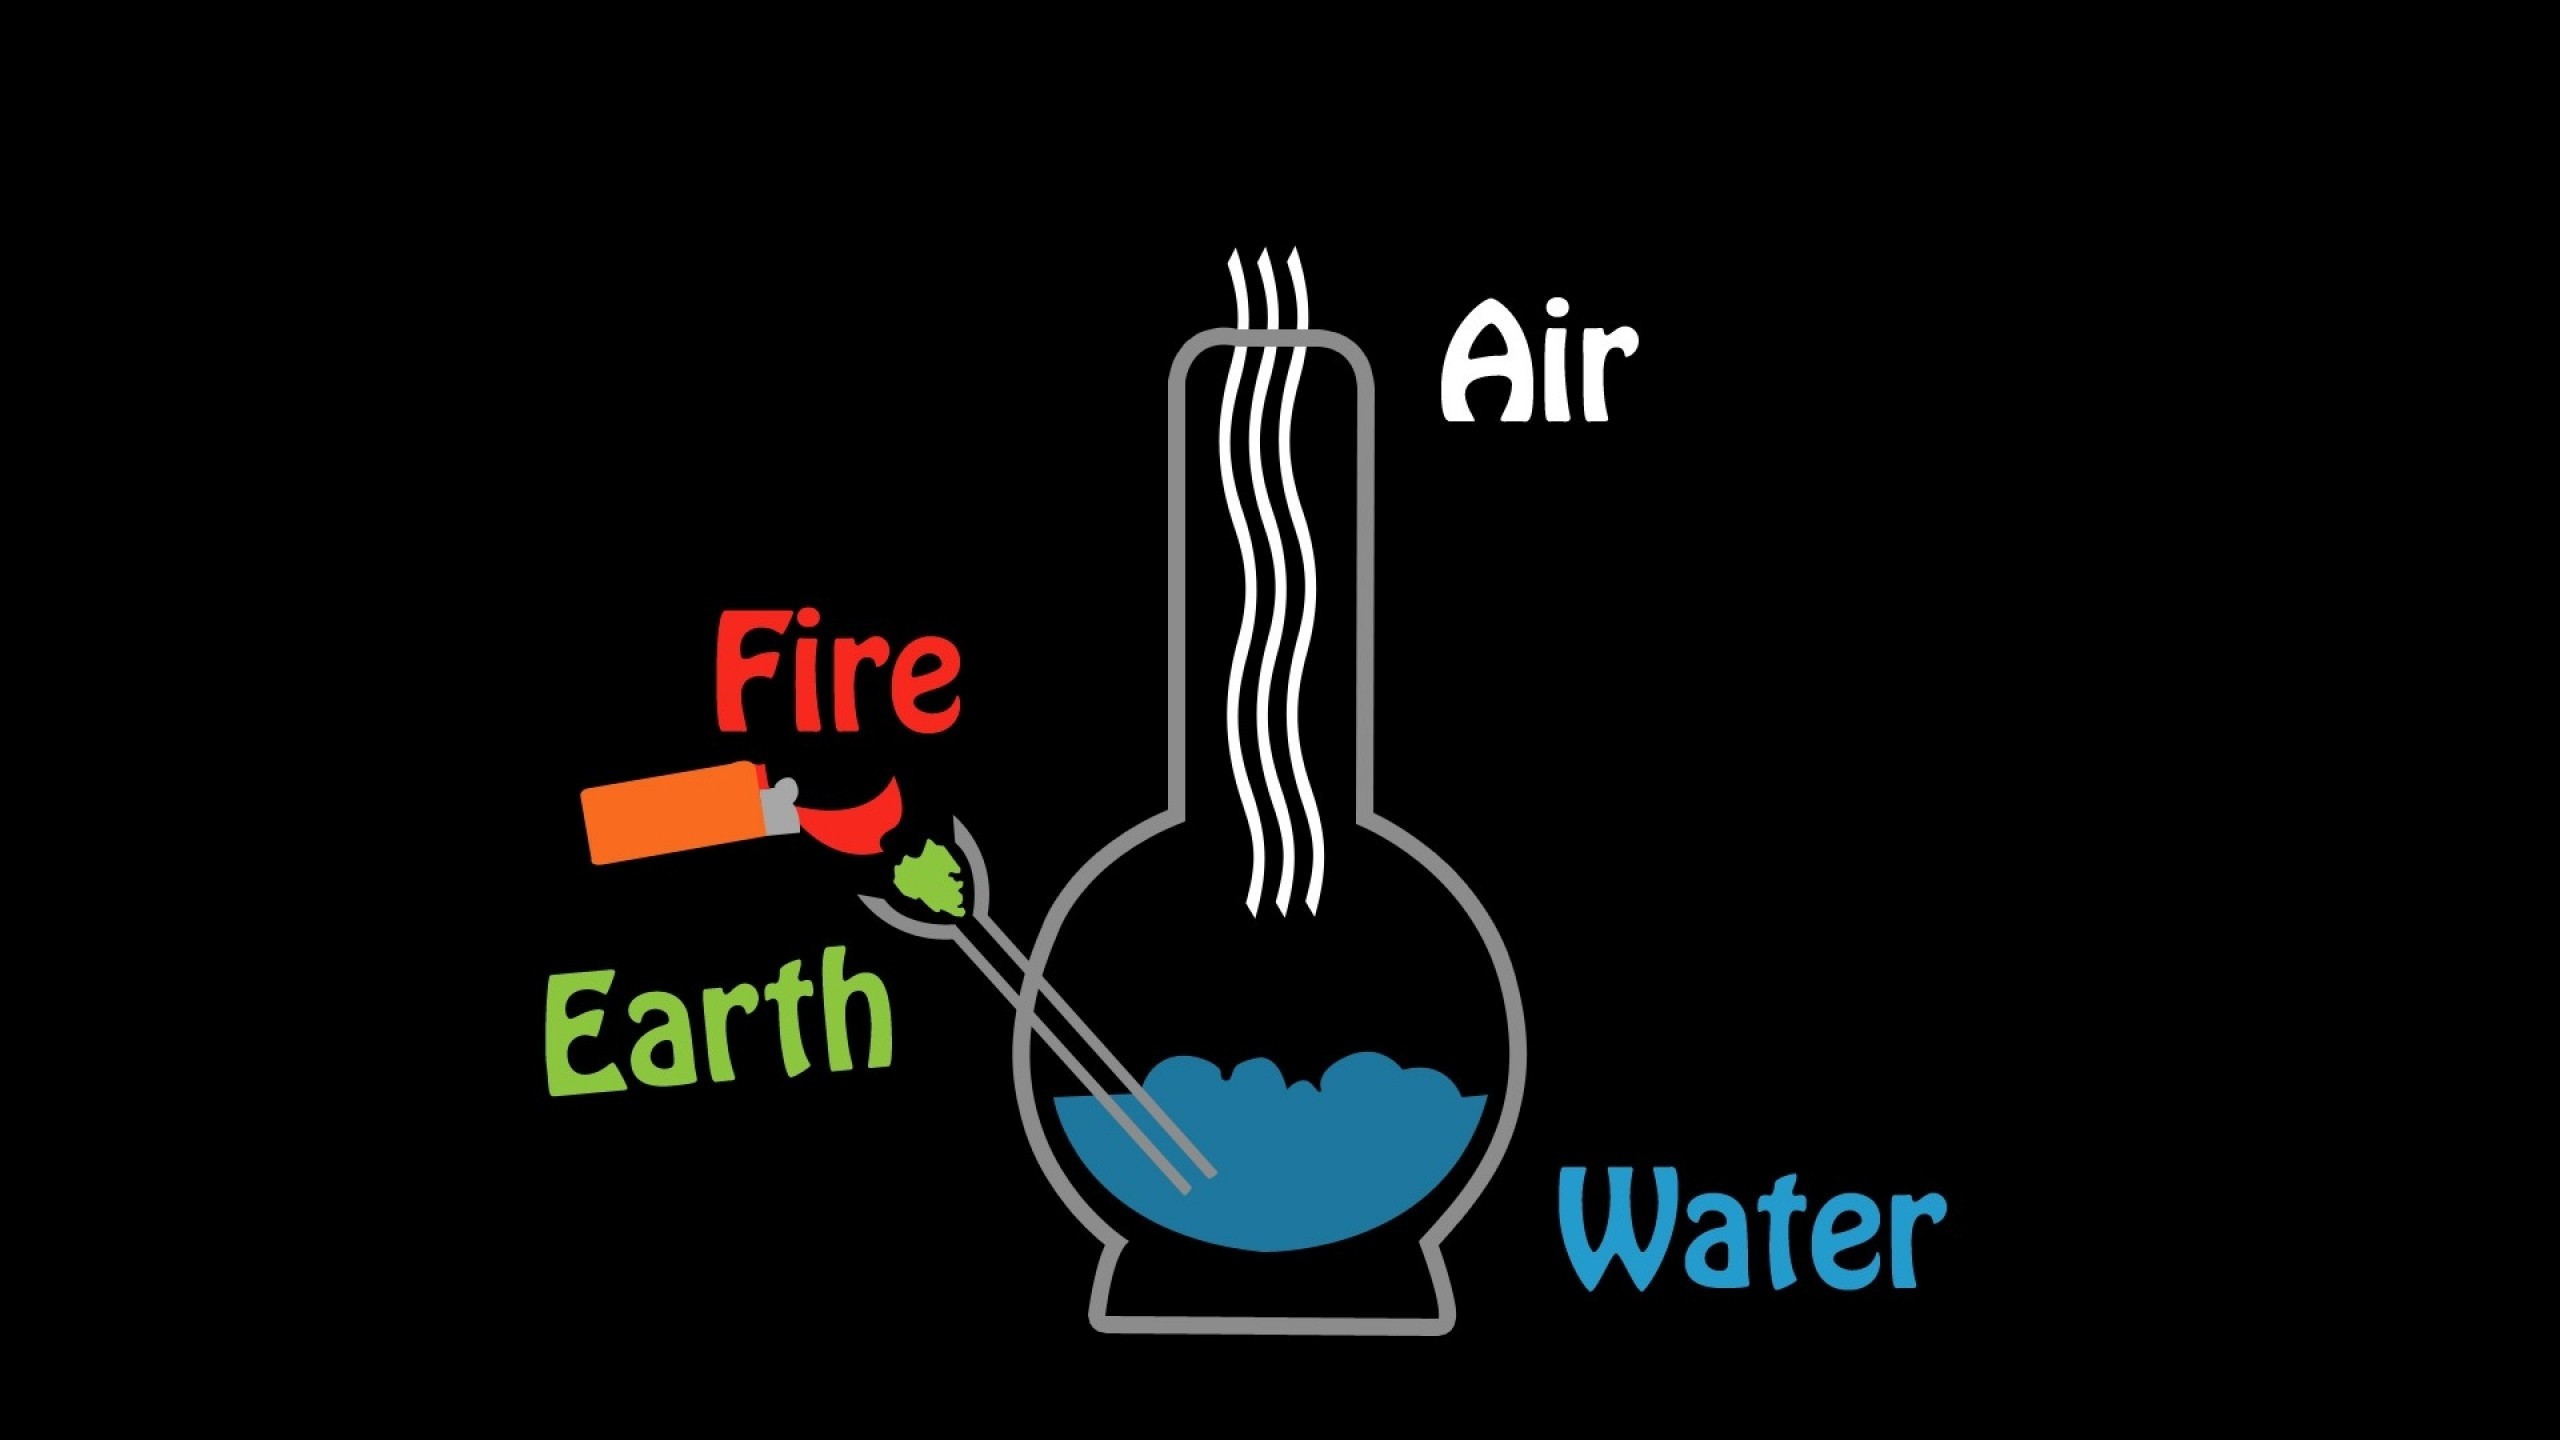 General 2560x1440 four elements drugs minimalism cannabis bong simple background black background science